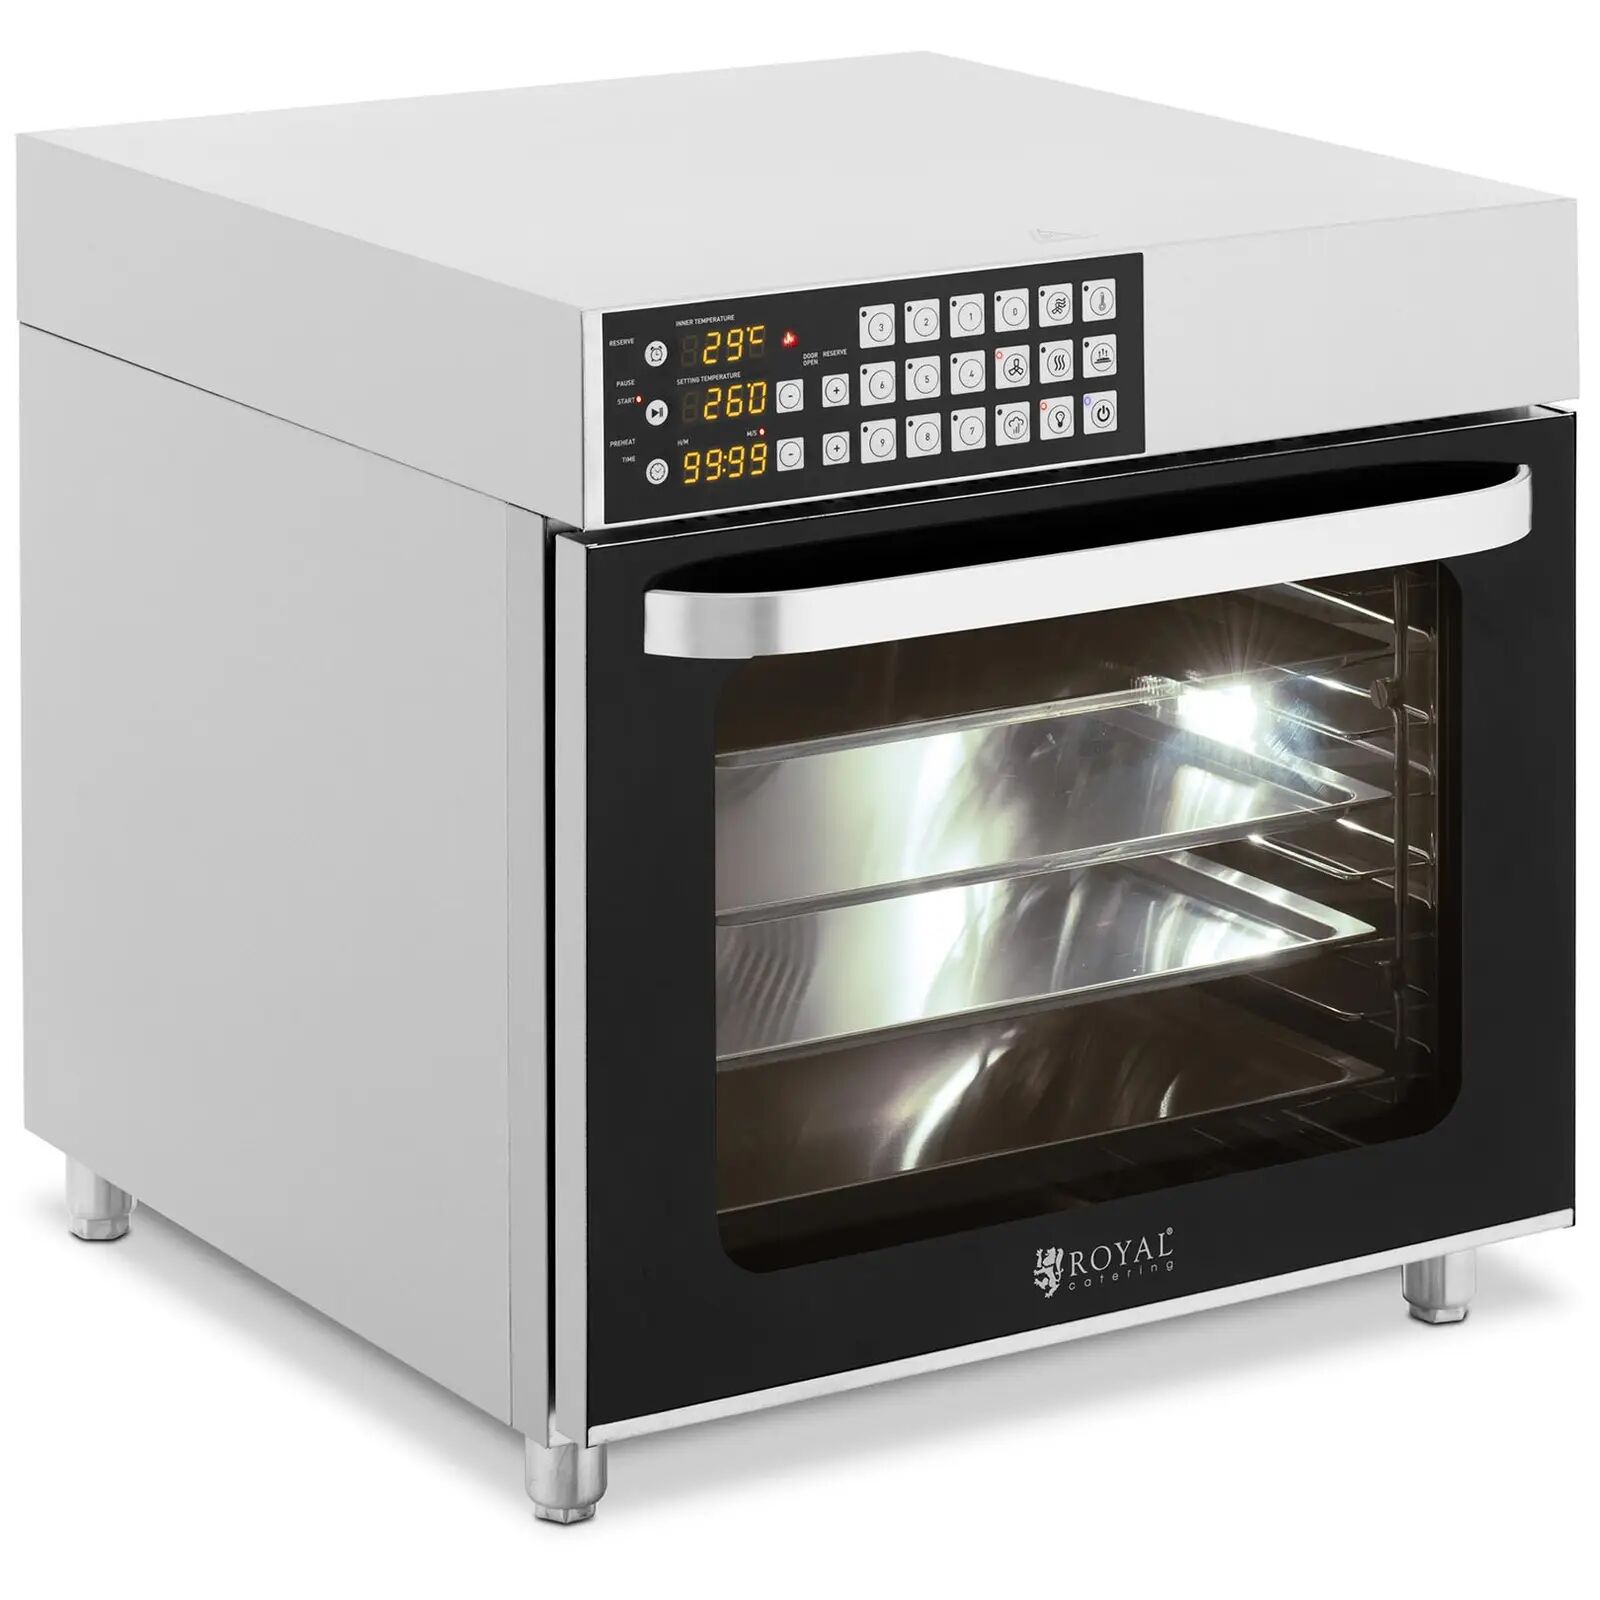 Royal Catering Hot air oven - 2800 W - Timer - 6 functions - 4 Trays RCOV-04